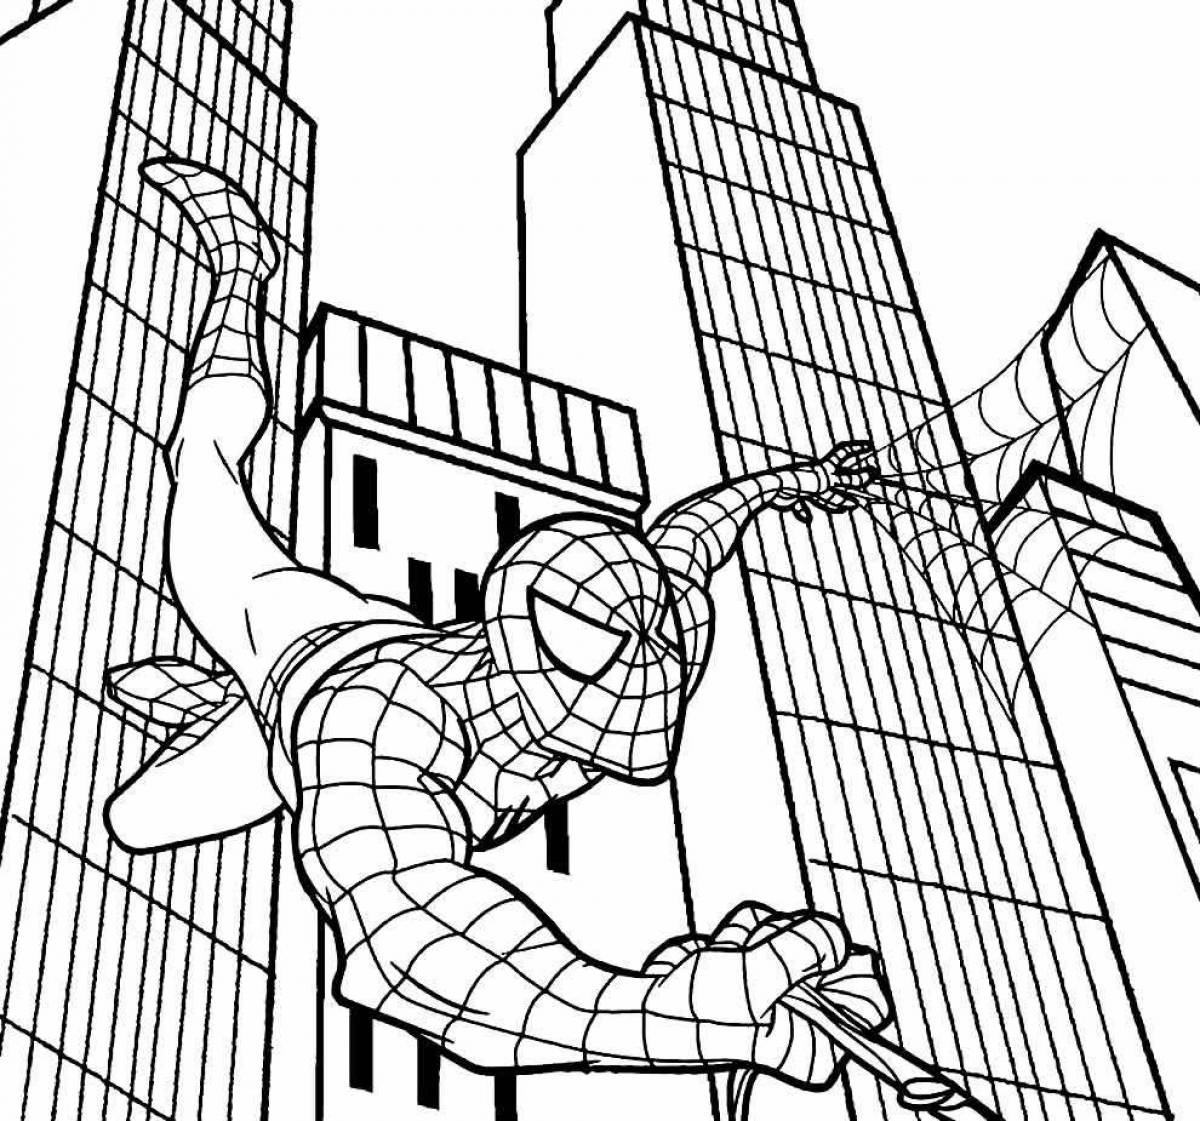 Cheerful spider-man antistress coloring book